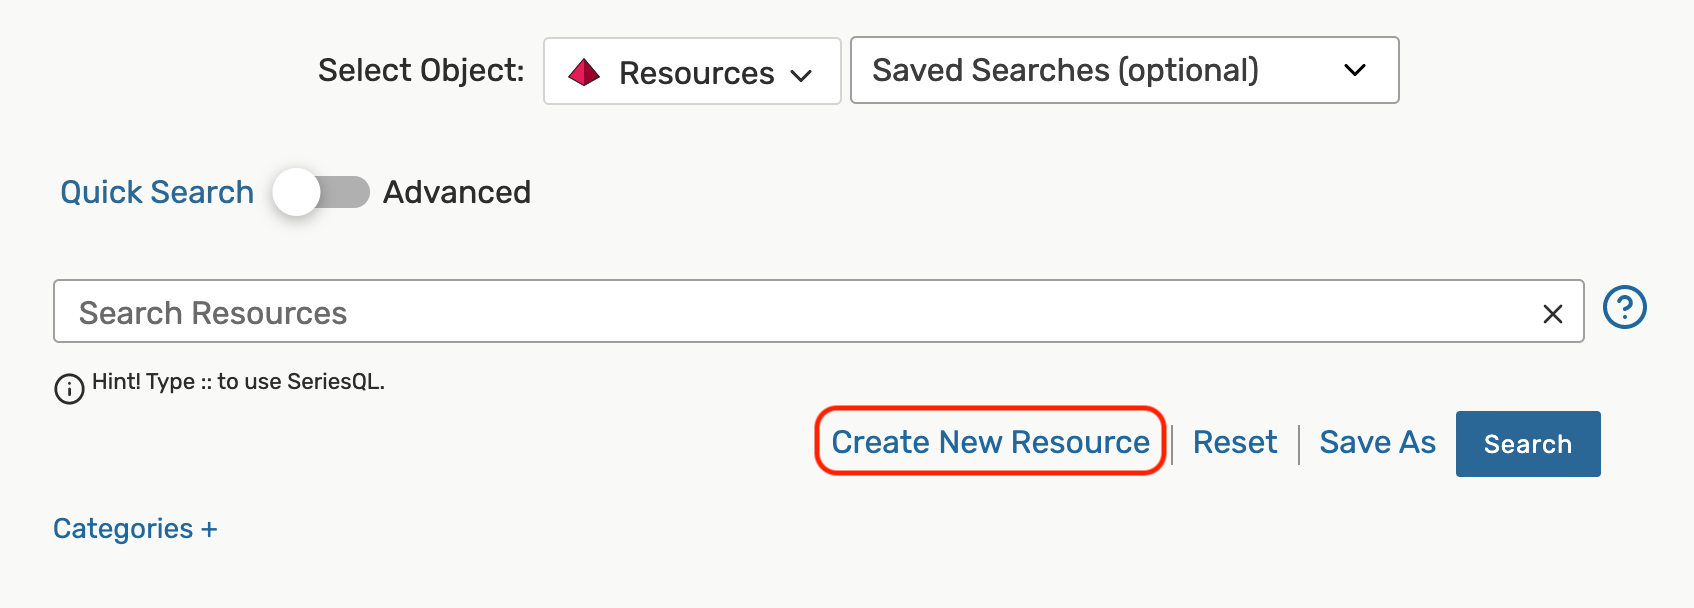 Create new resource button below the resource search